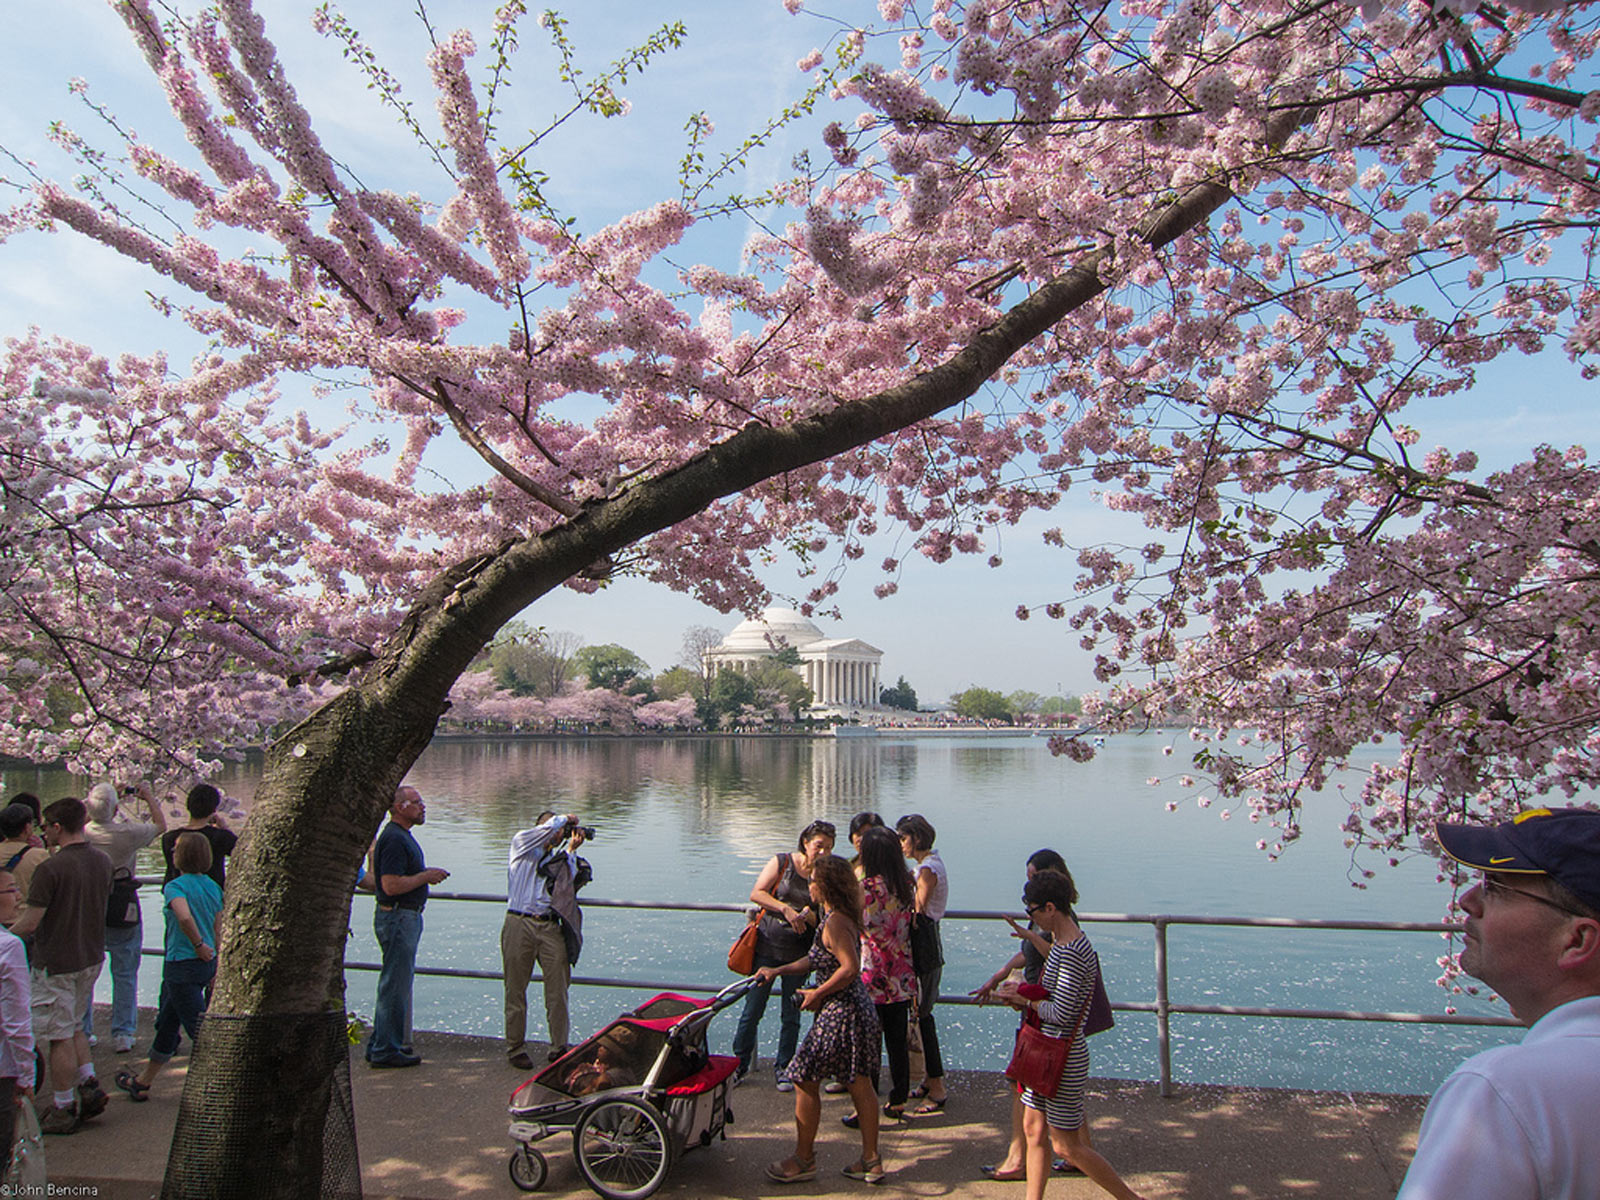 How to Get to the Cherry Blossom Trees in DC